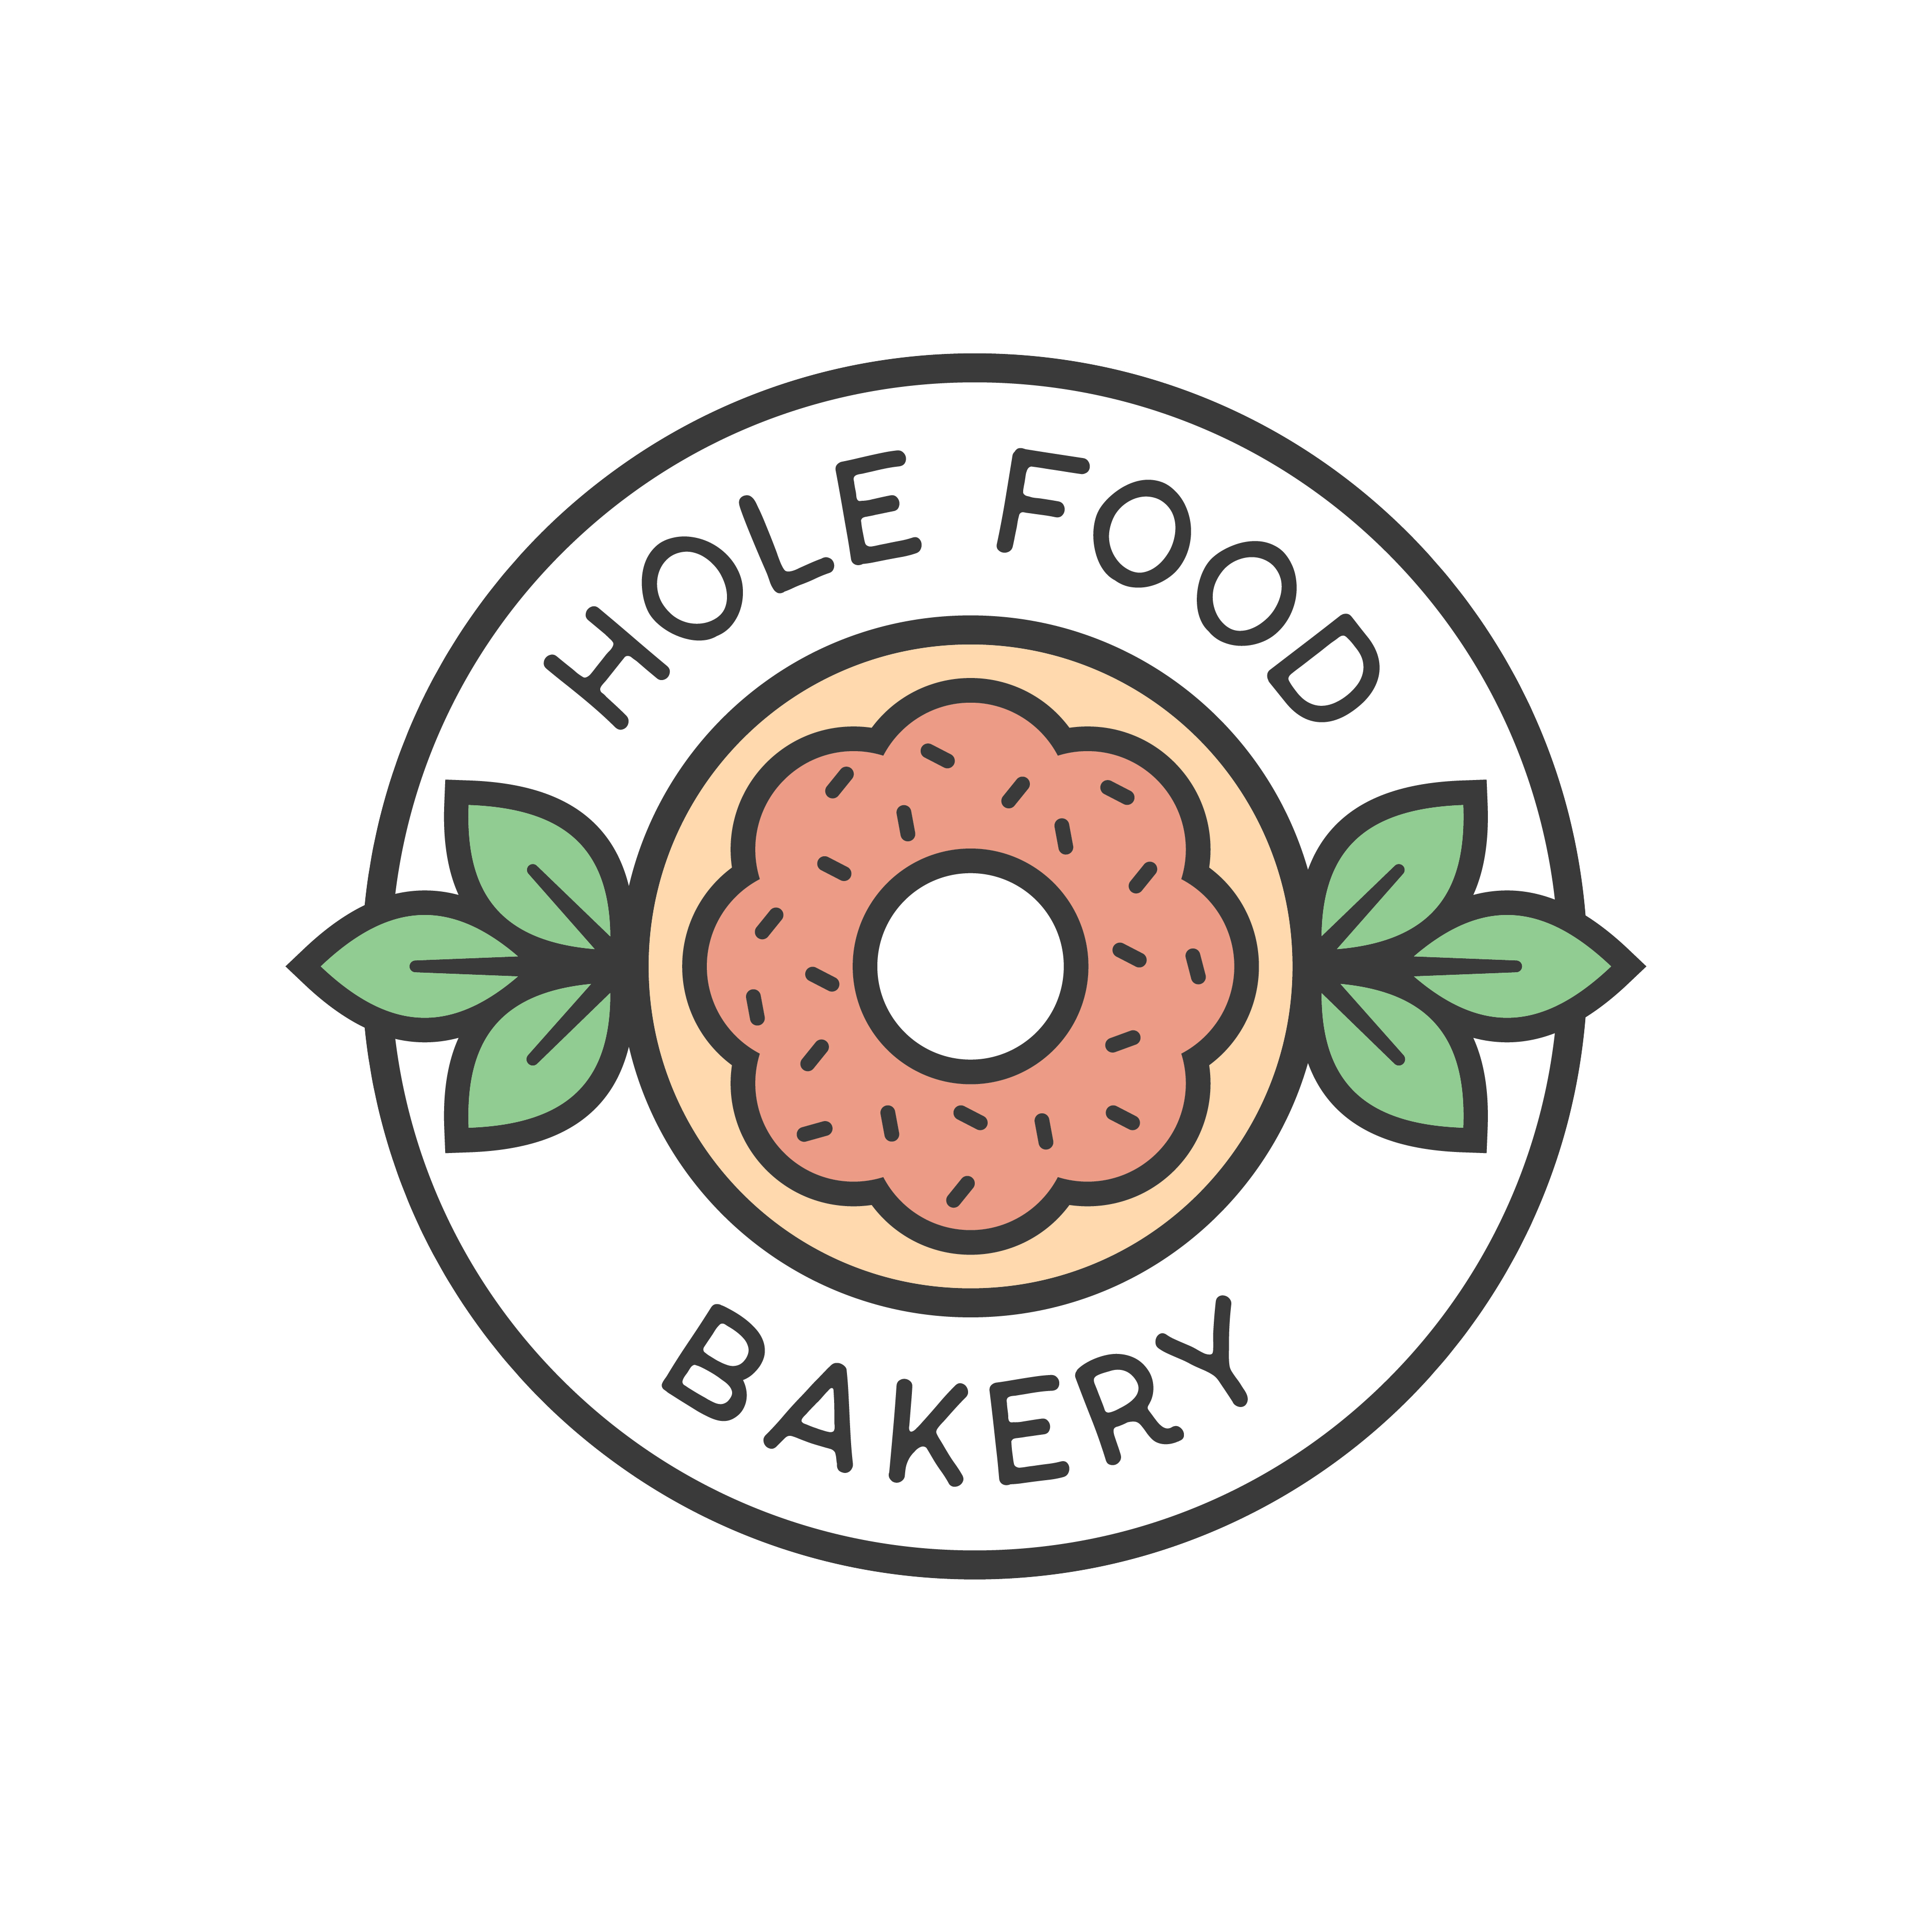 Hole Food Bakery logo design by logo designer Kyle Goens Design for your inspiration and for the worlds largest logo competition